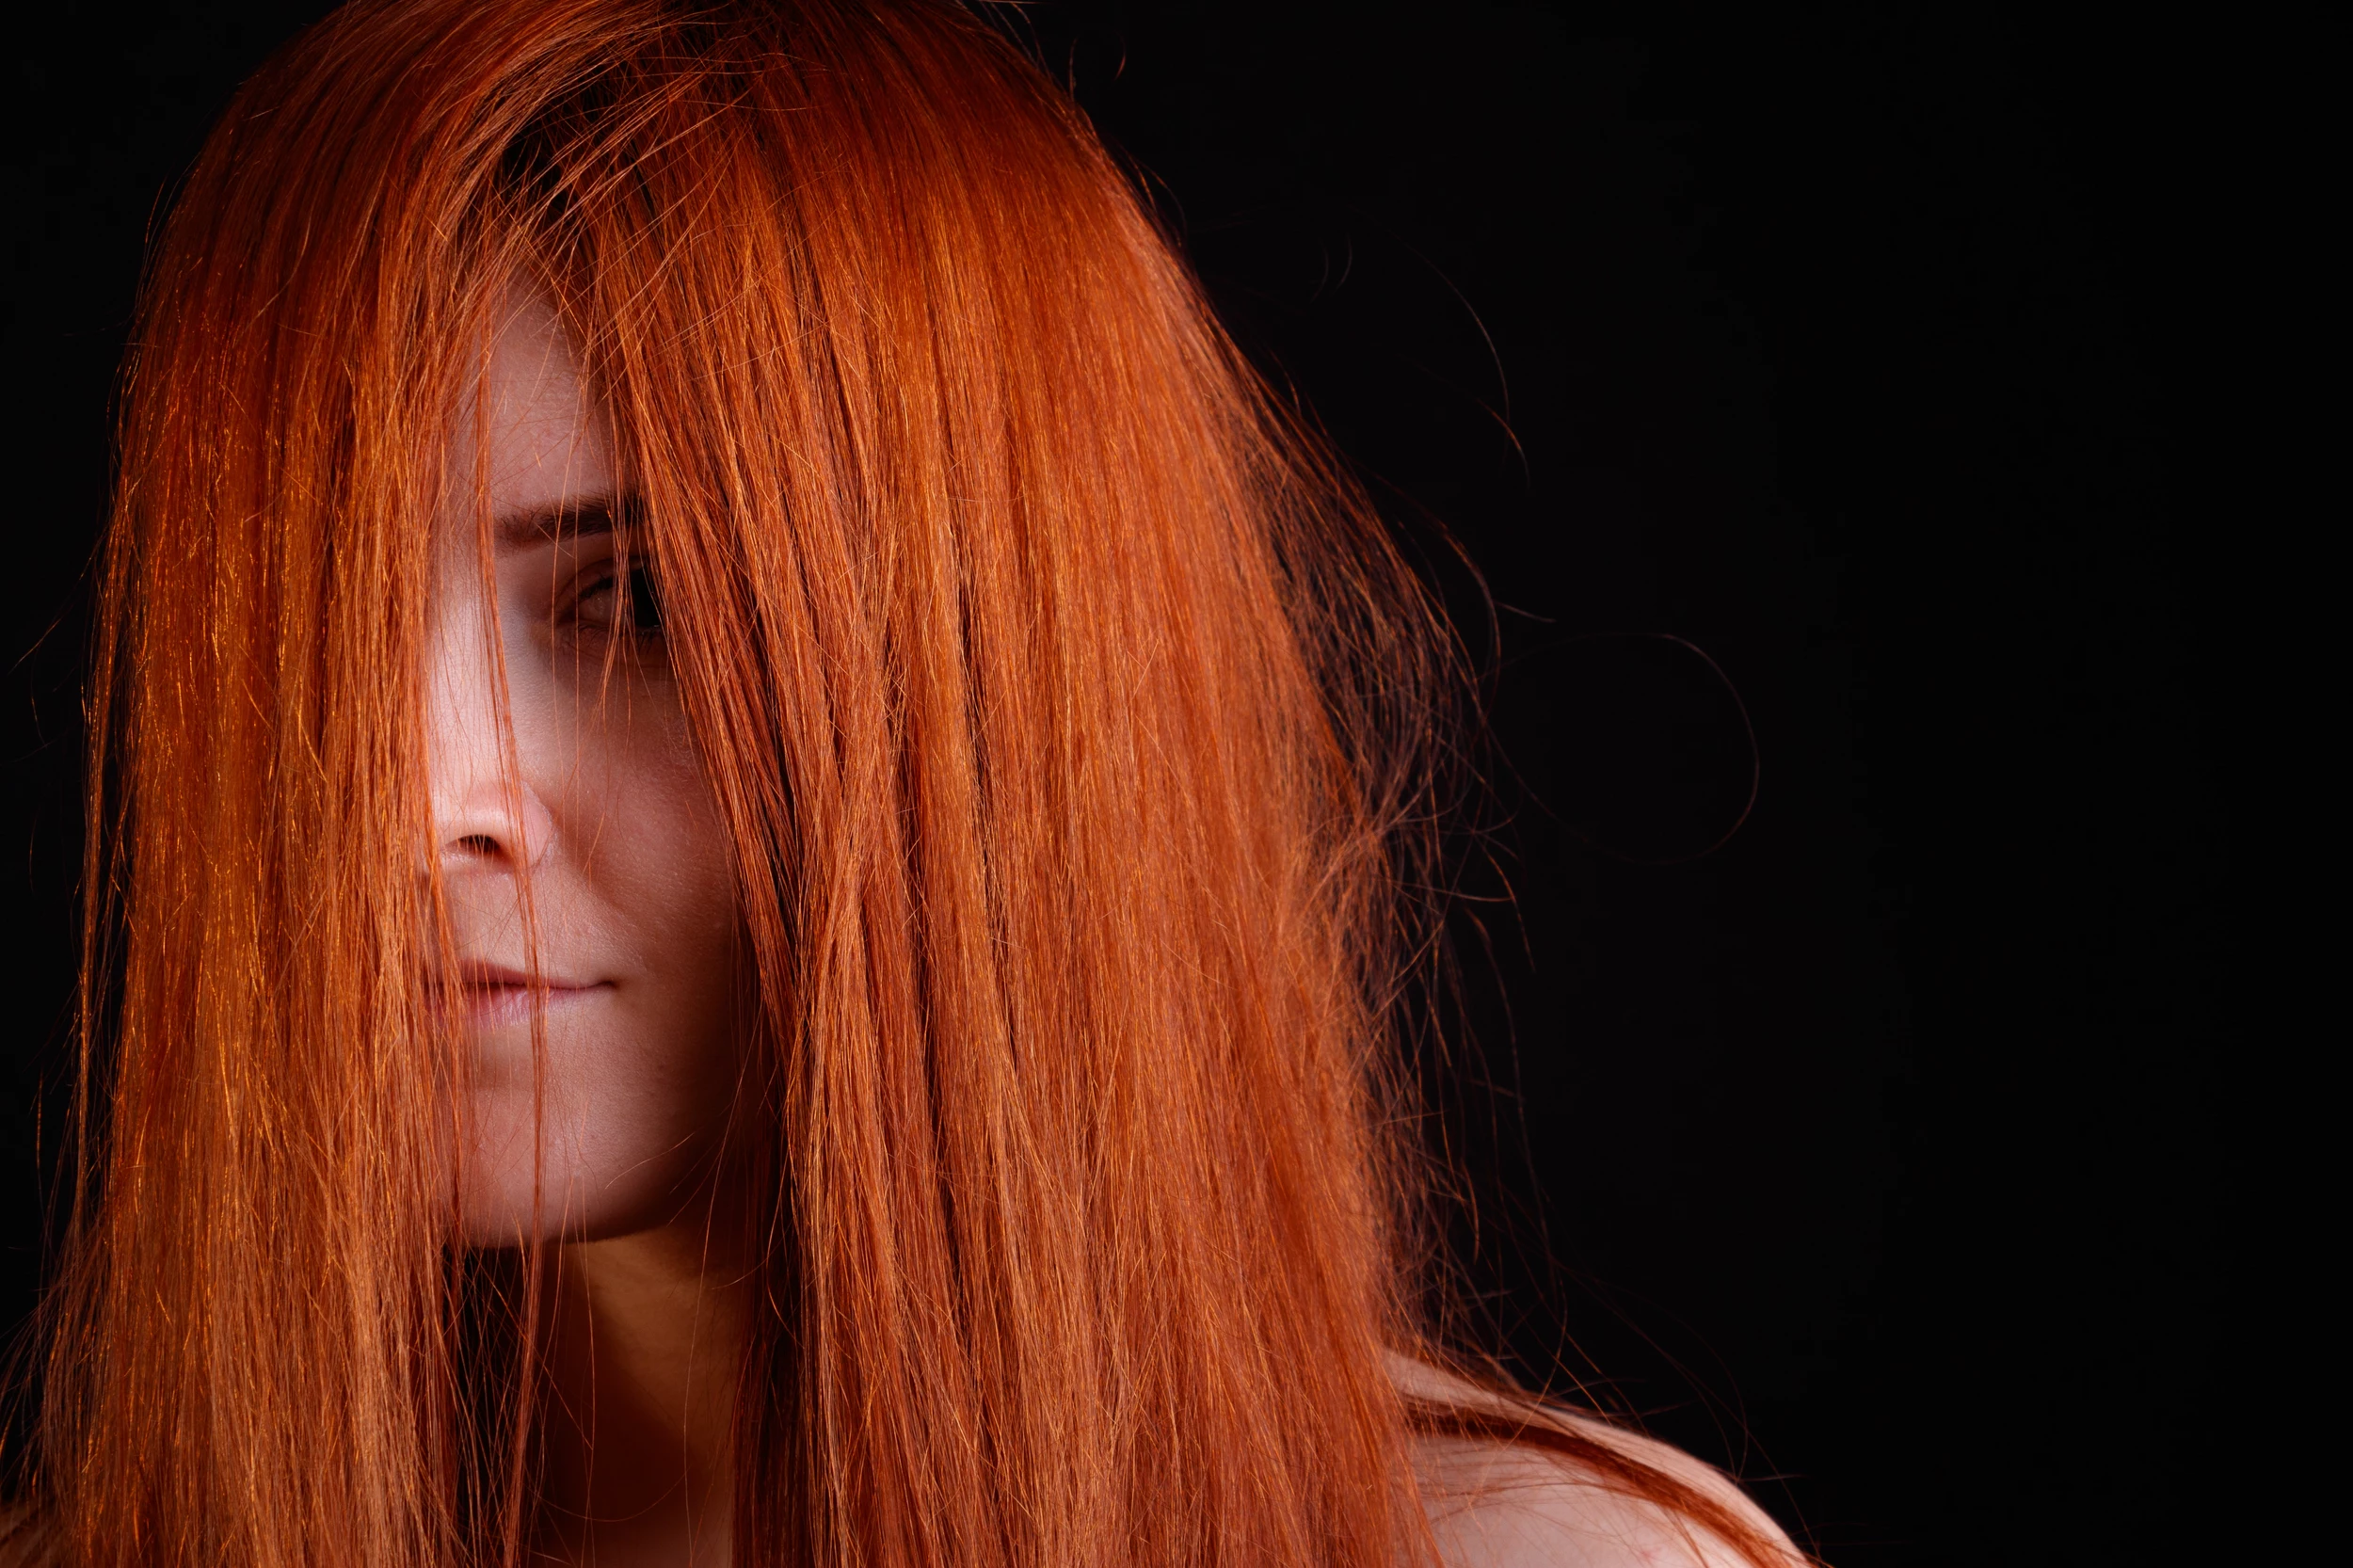 Midland/Odessa Redheads May 26 is World Redhead Day, Here Are 10 Fun Facts